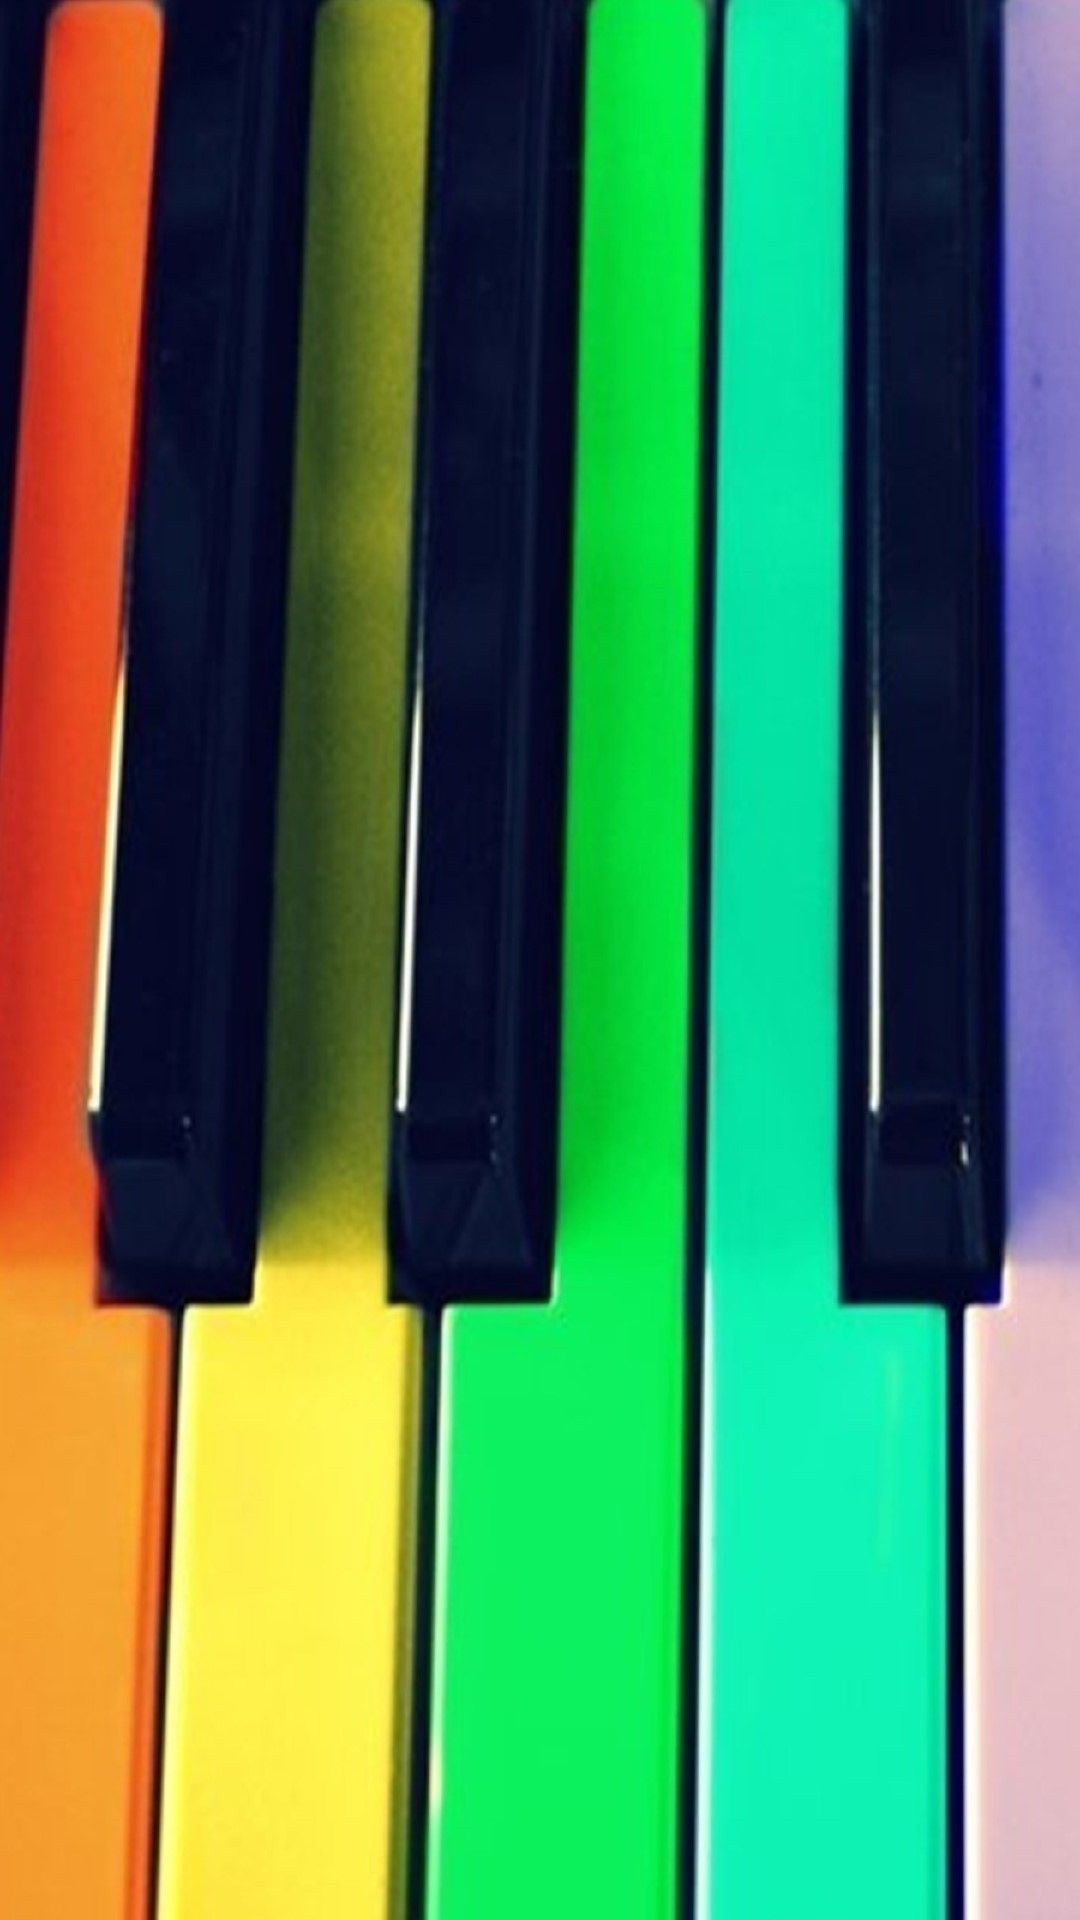 Colorful Piano Wallpapers - 4k, HD Colorful Piano Backgrounds on ... Rainbow Piano Backgrounds